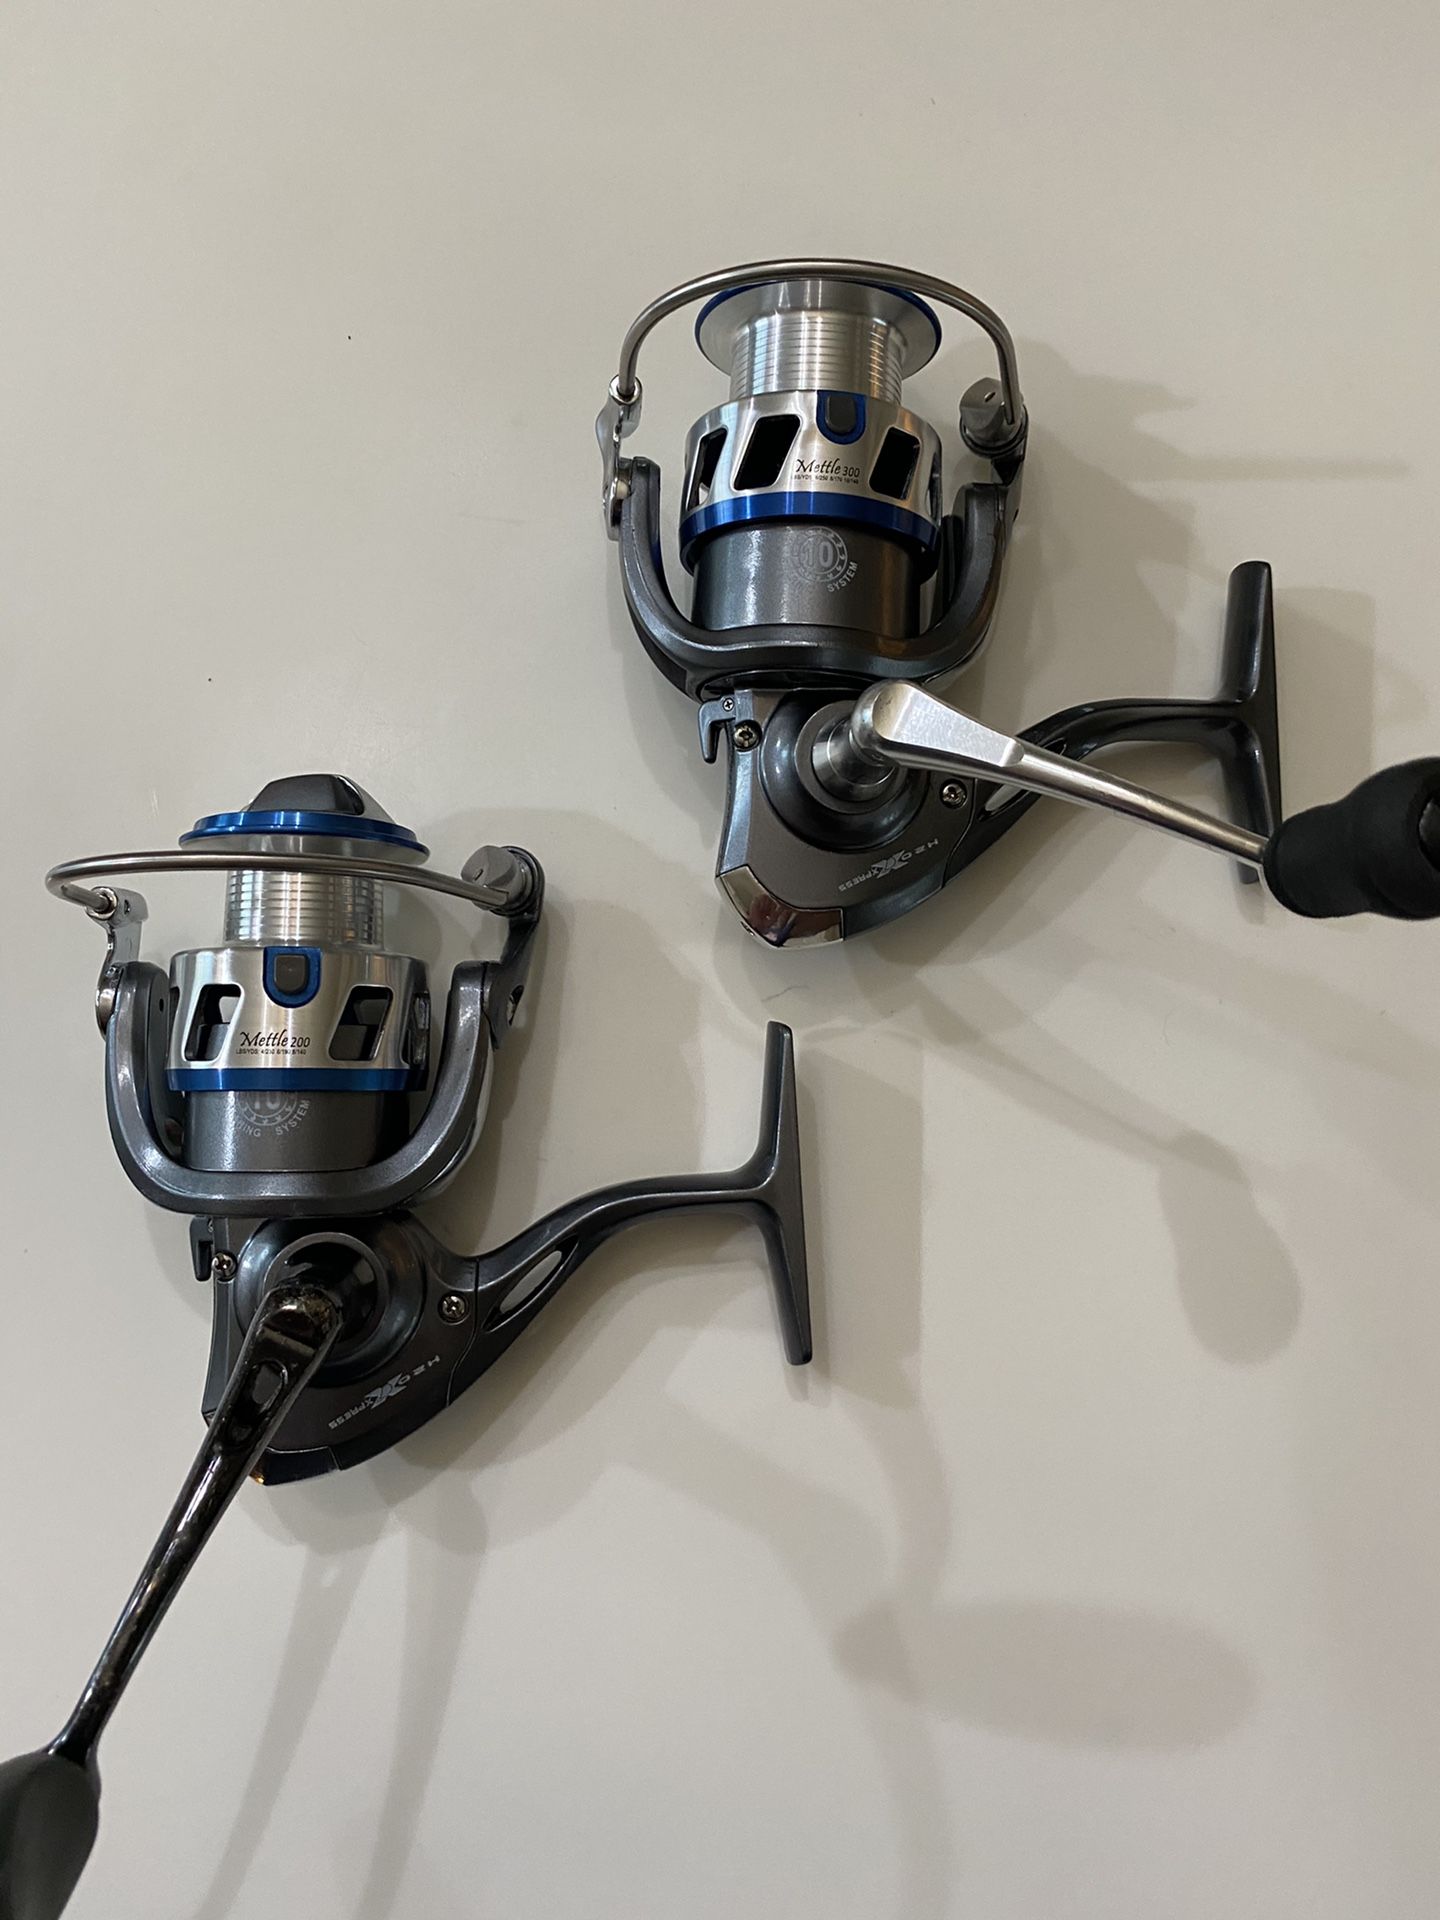 H2O Xpress Mettle 200 or 300 spinning fishing reel